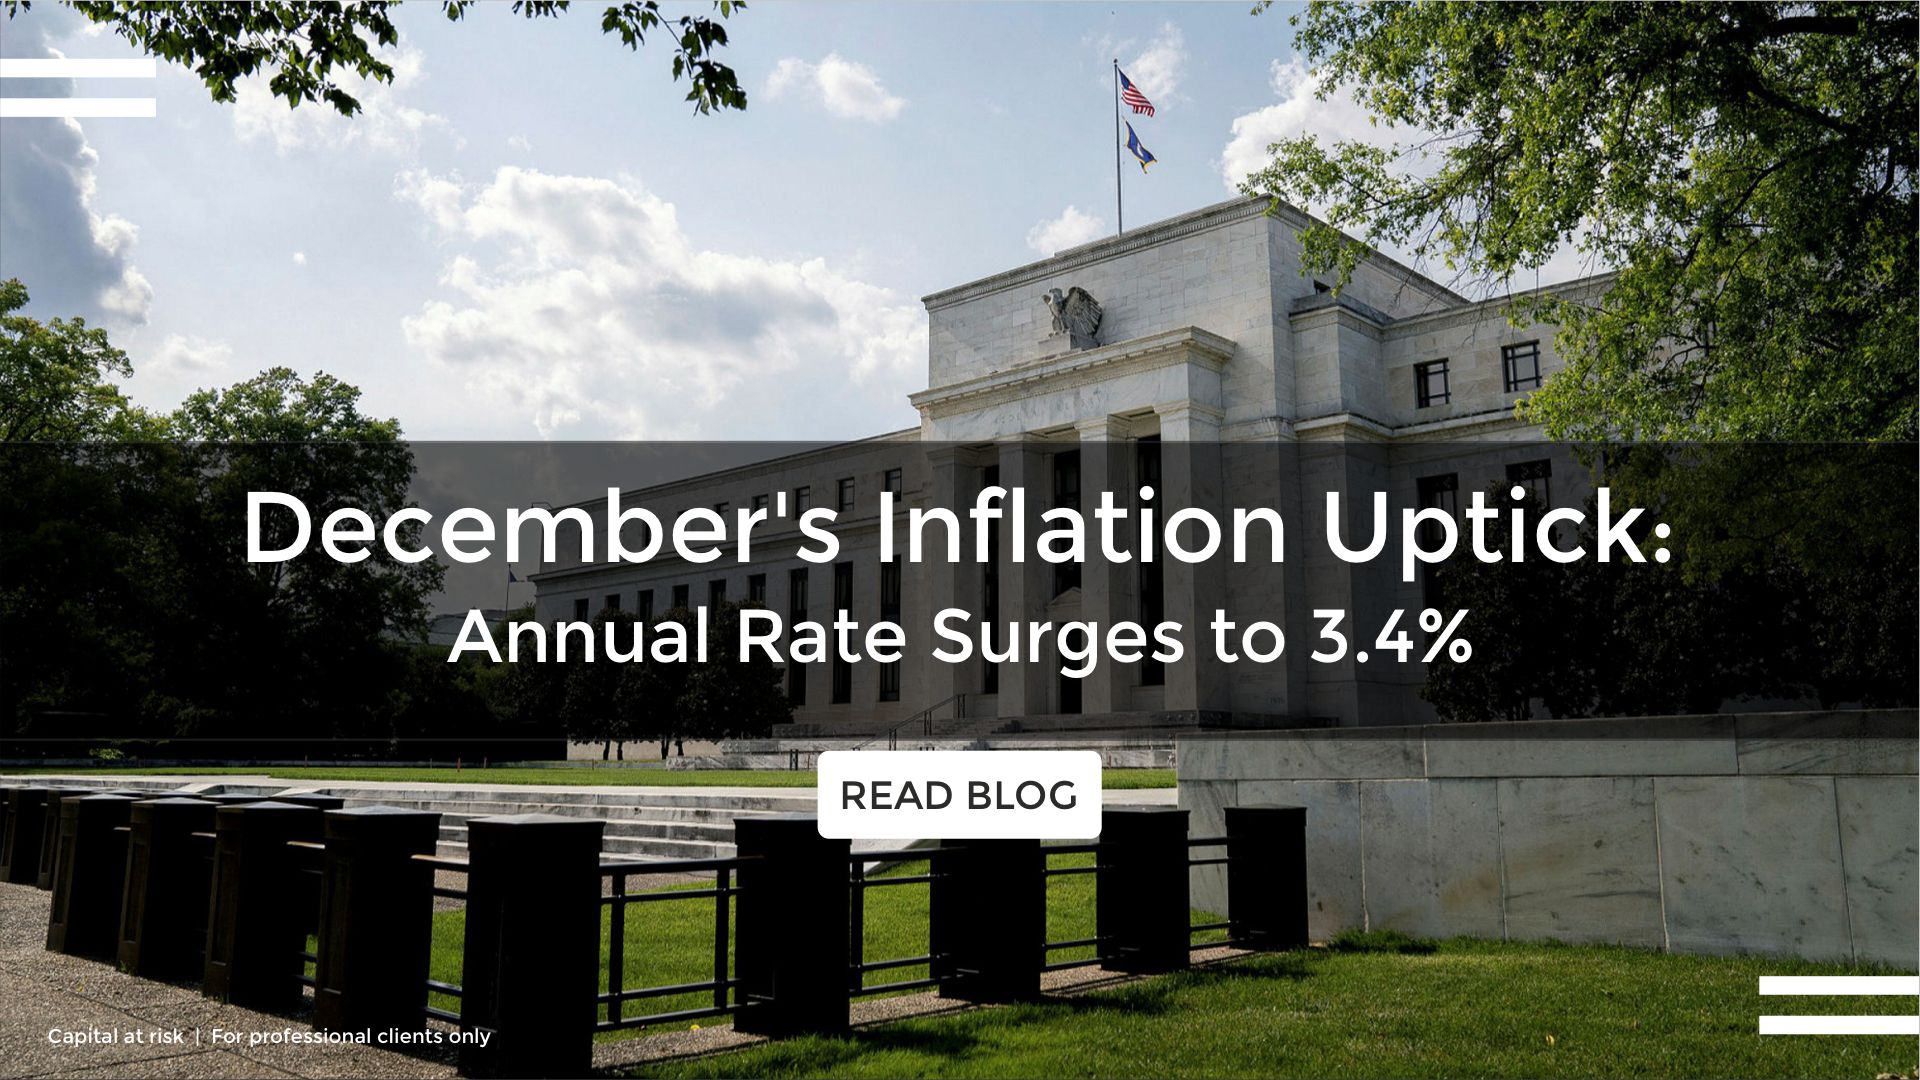 December's Inflation Uptick: Annual Rate Surges to 3.4%